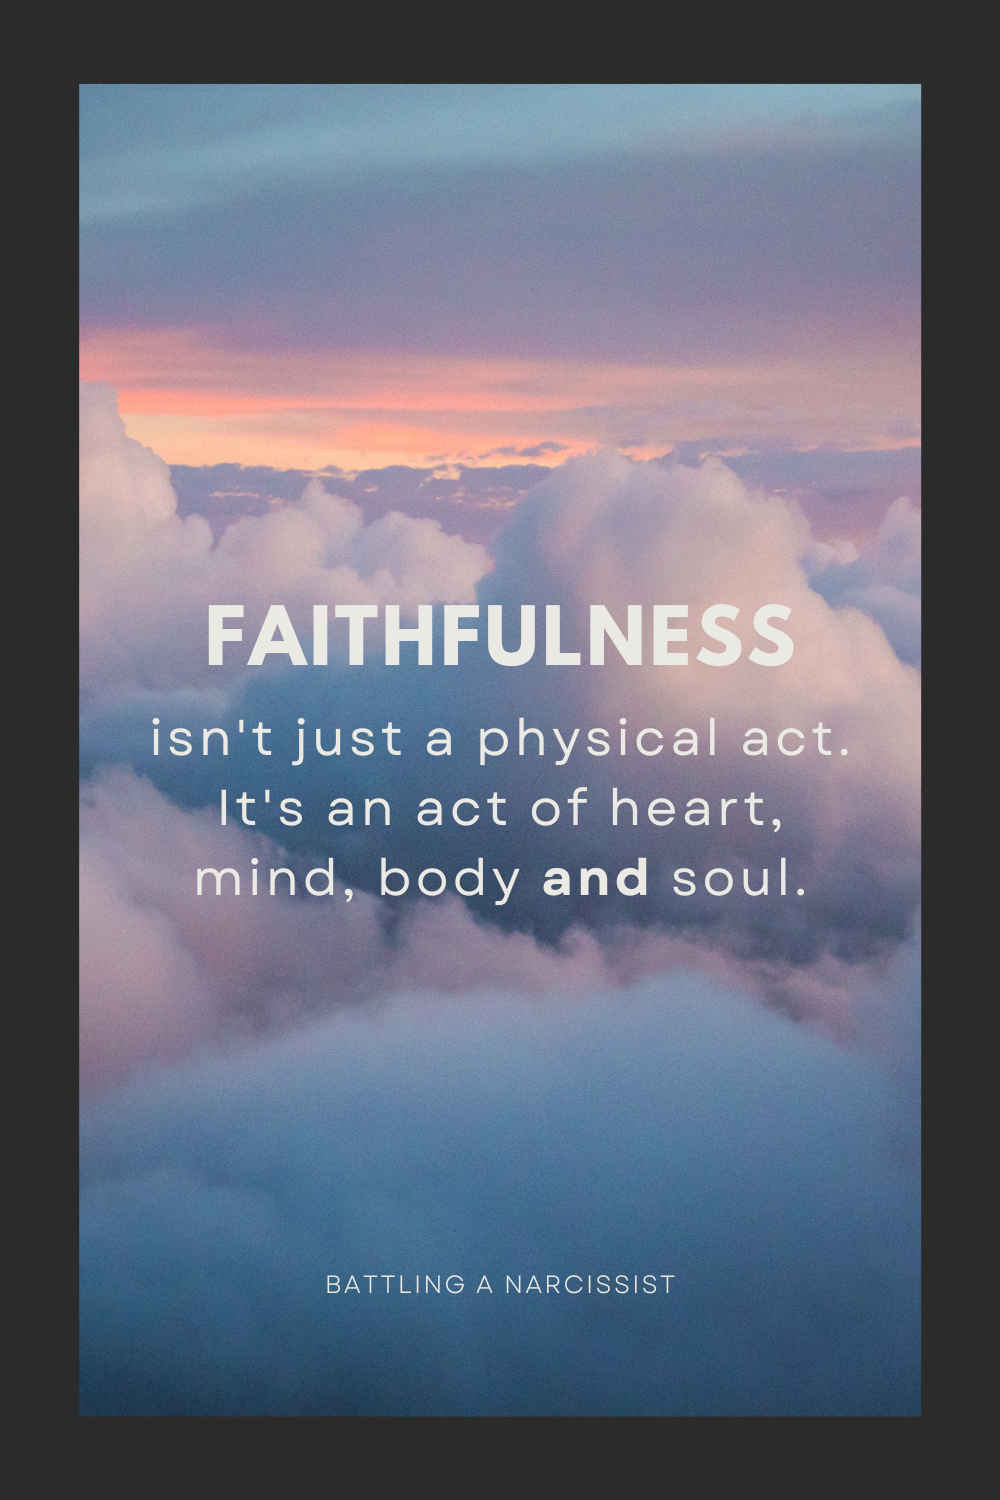 Faithfulness isn't just a physical act. It's an act of heart, mind, body and soul.